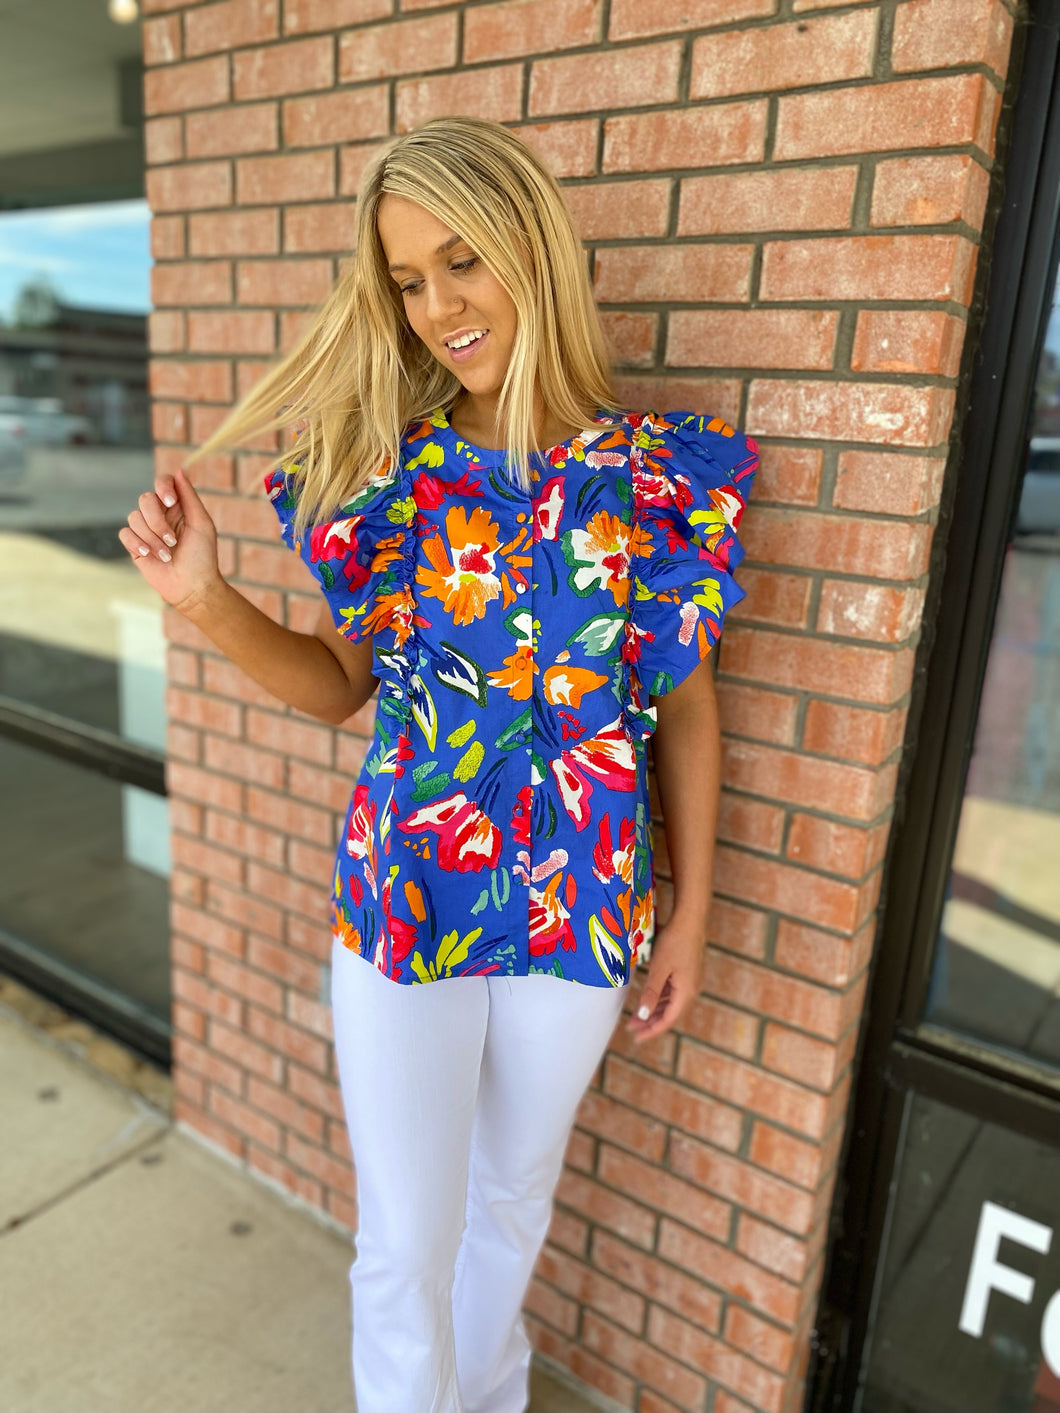 The Harlow Floral Top